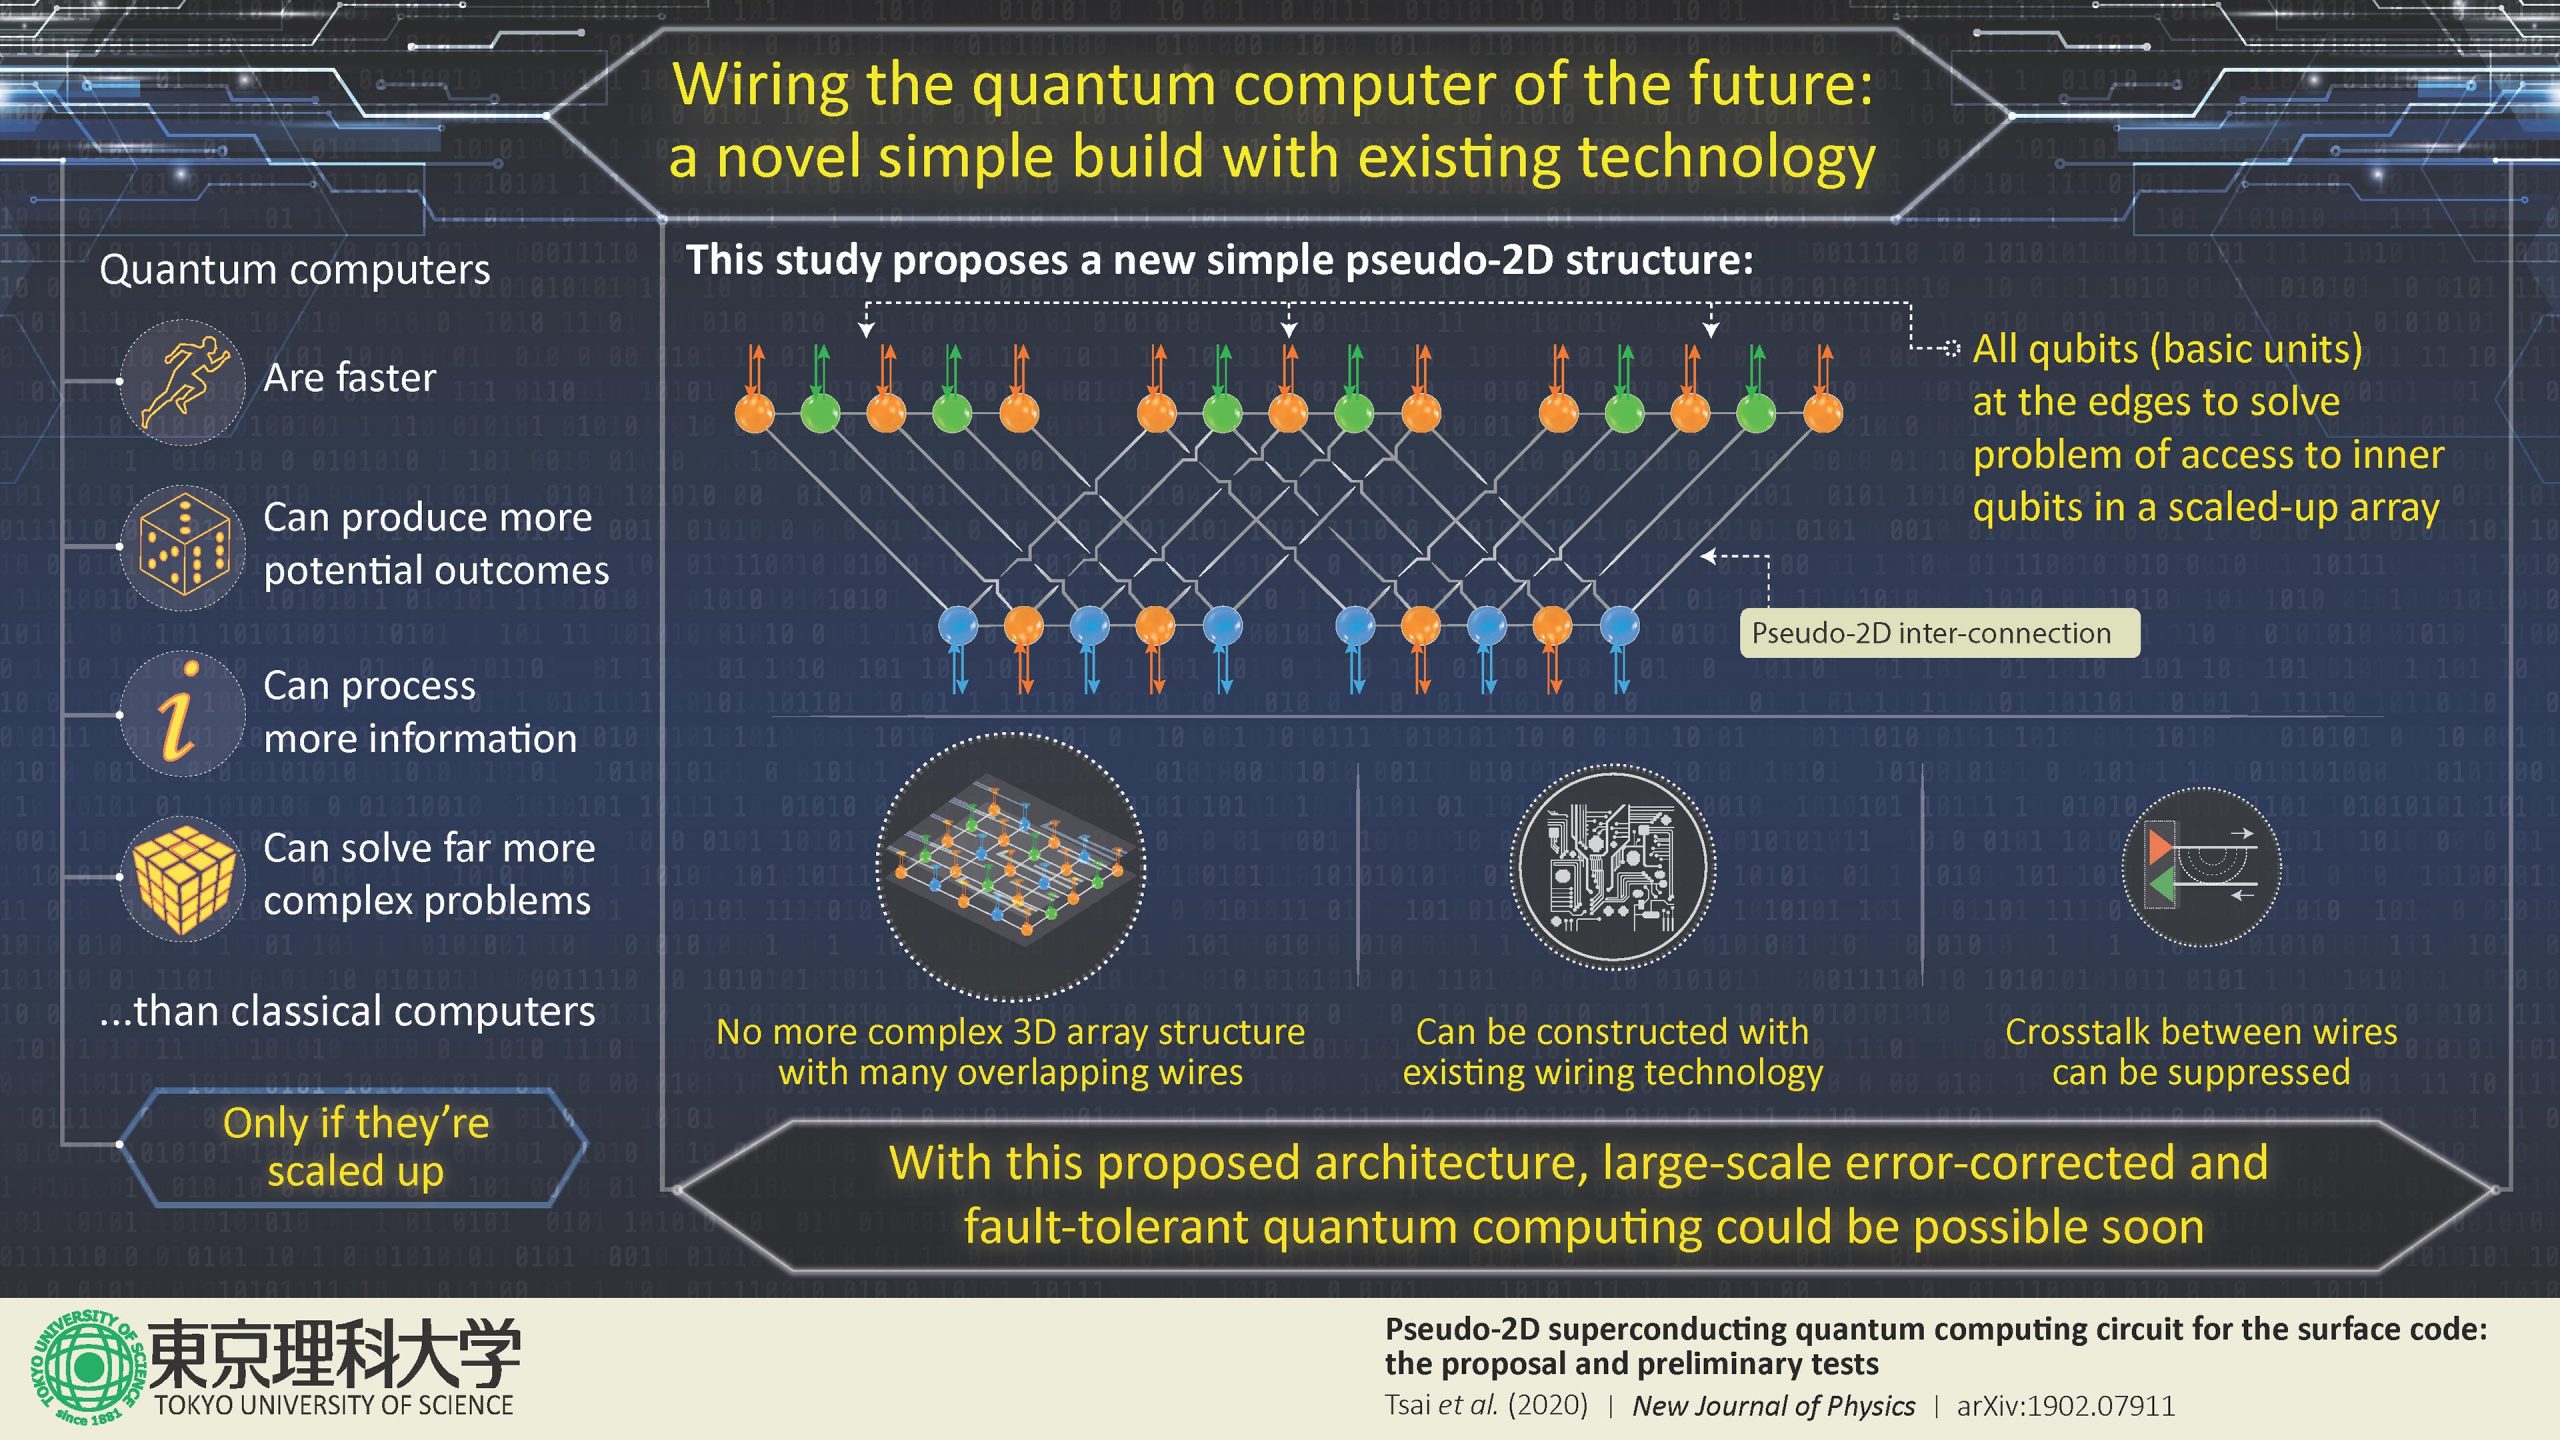 Quantum Computer of the Future A Novel 2D Build With Existing Technology